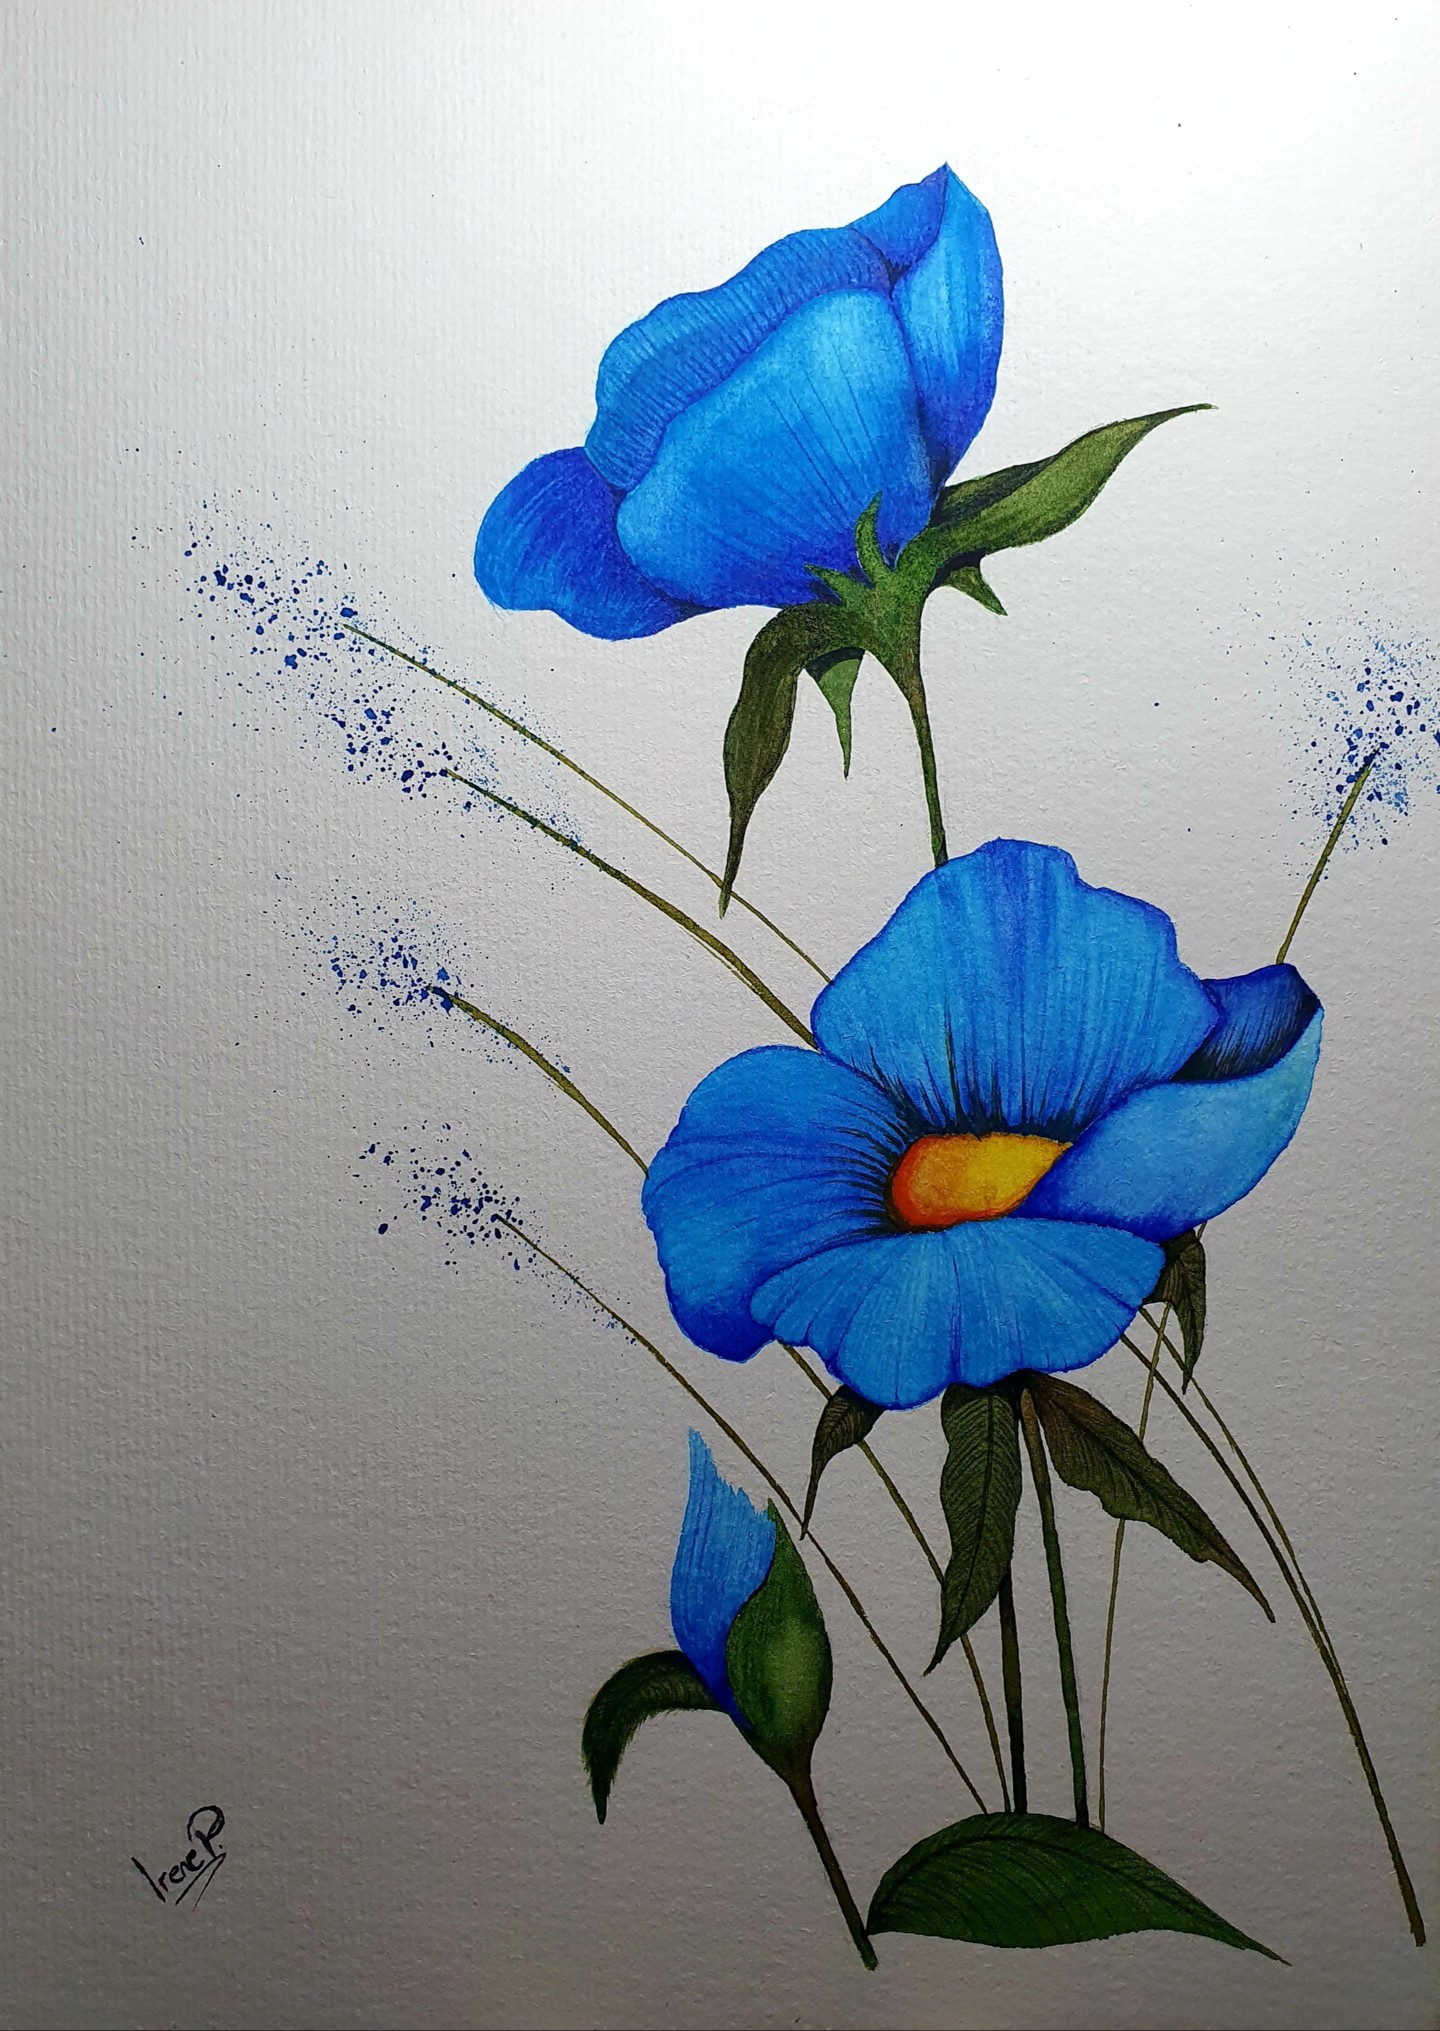 Flores Azules, Painting by Irene Pestana Eliche | Artmajeur